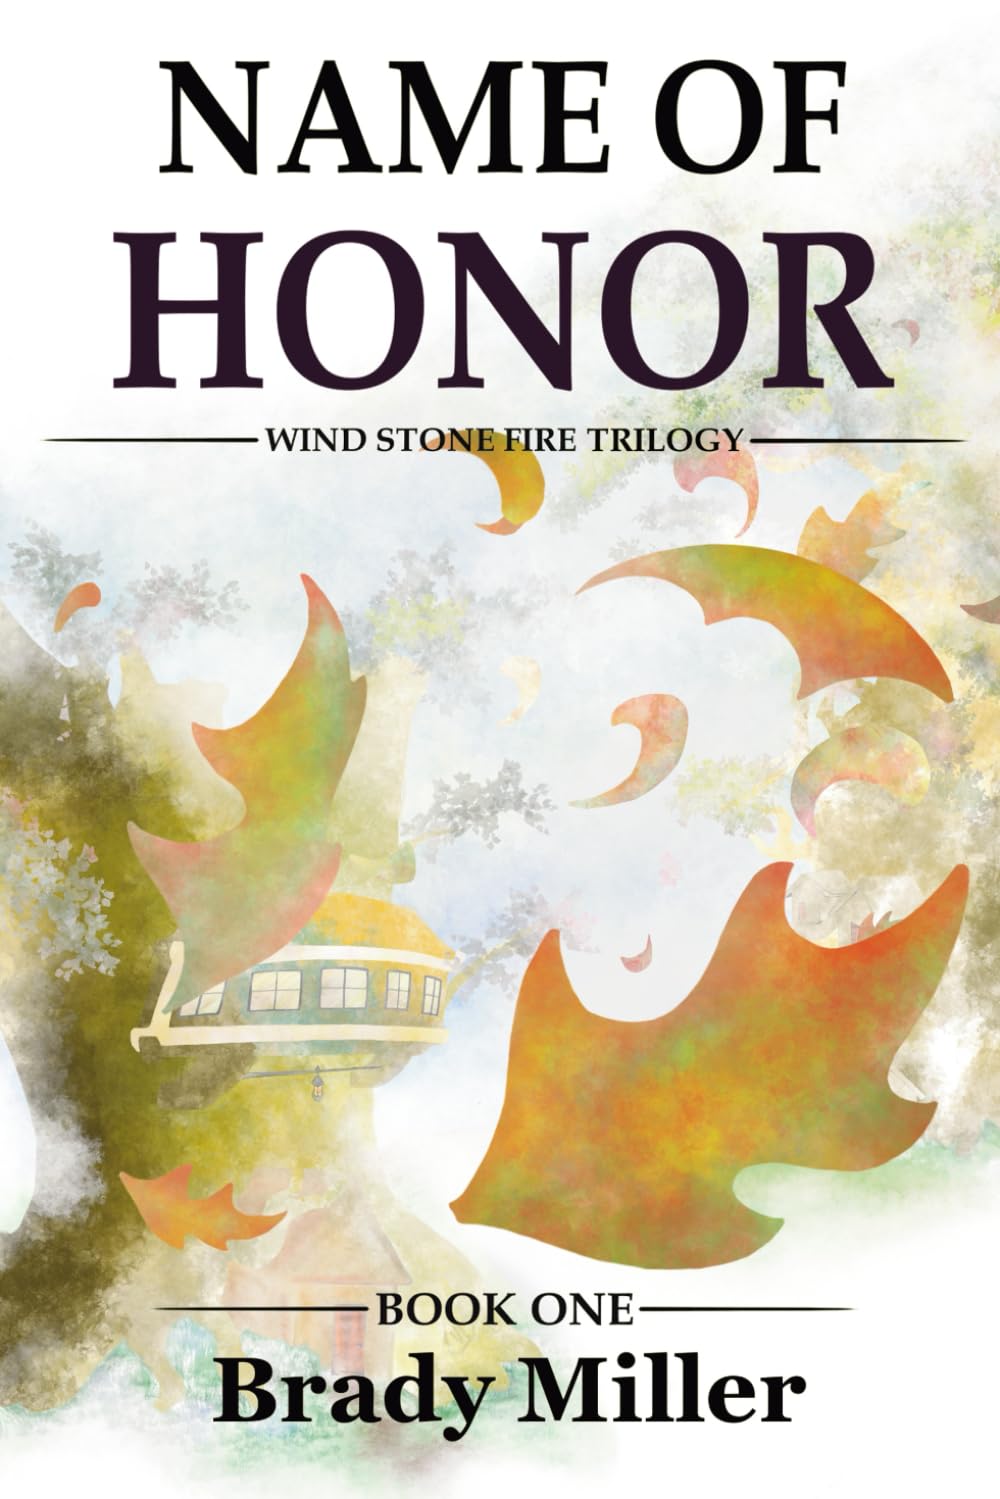 New novel "Name of Honor" by Brady Miller is released, the first book of a fantasy adventure trilogy that examines choices, consequences, and the complex nuances of good and evil